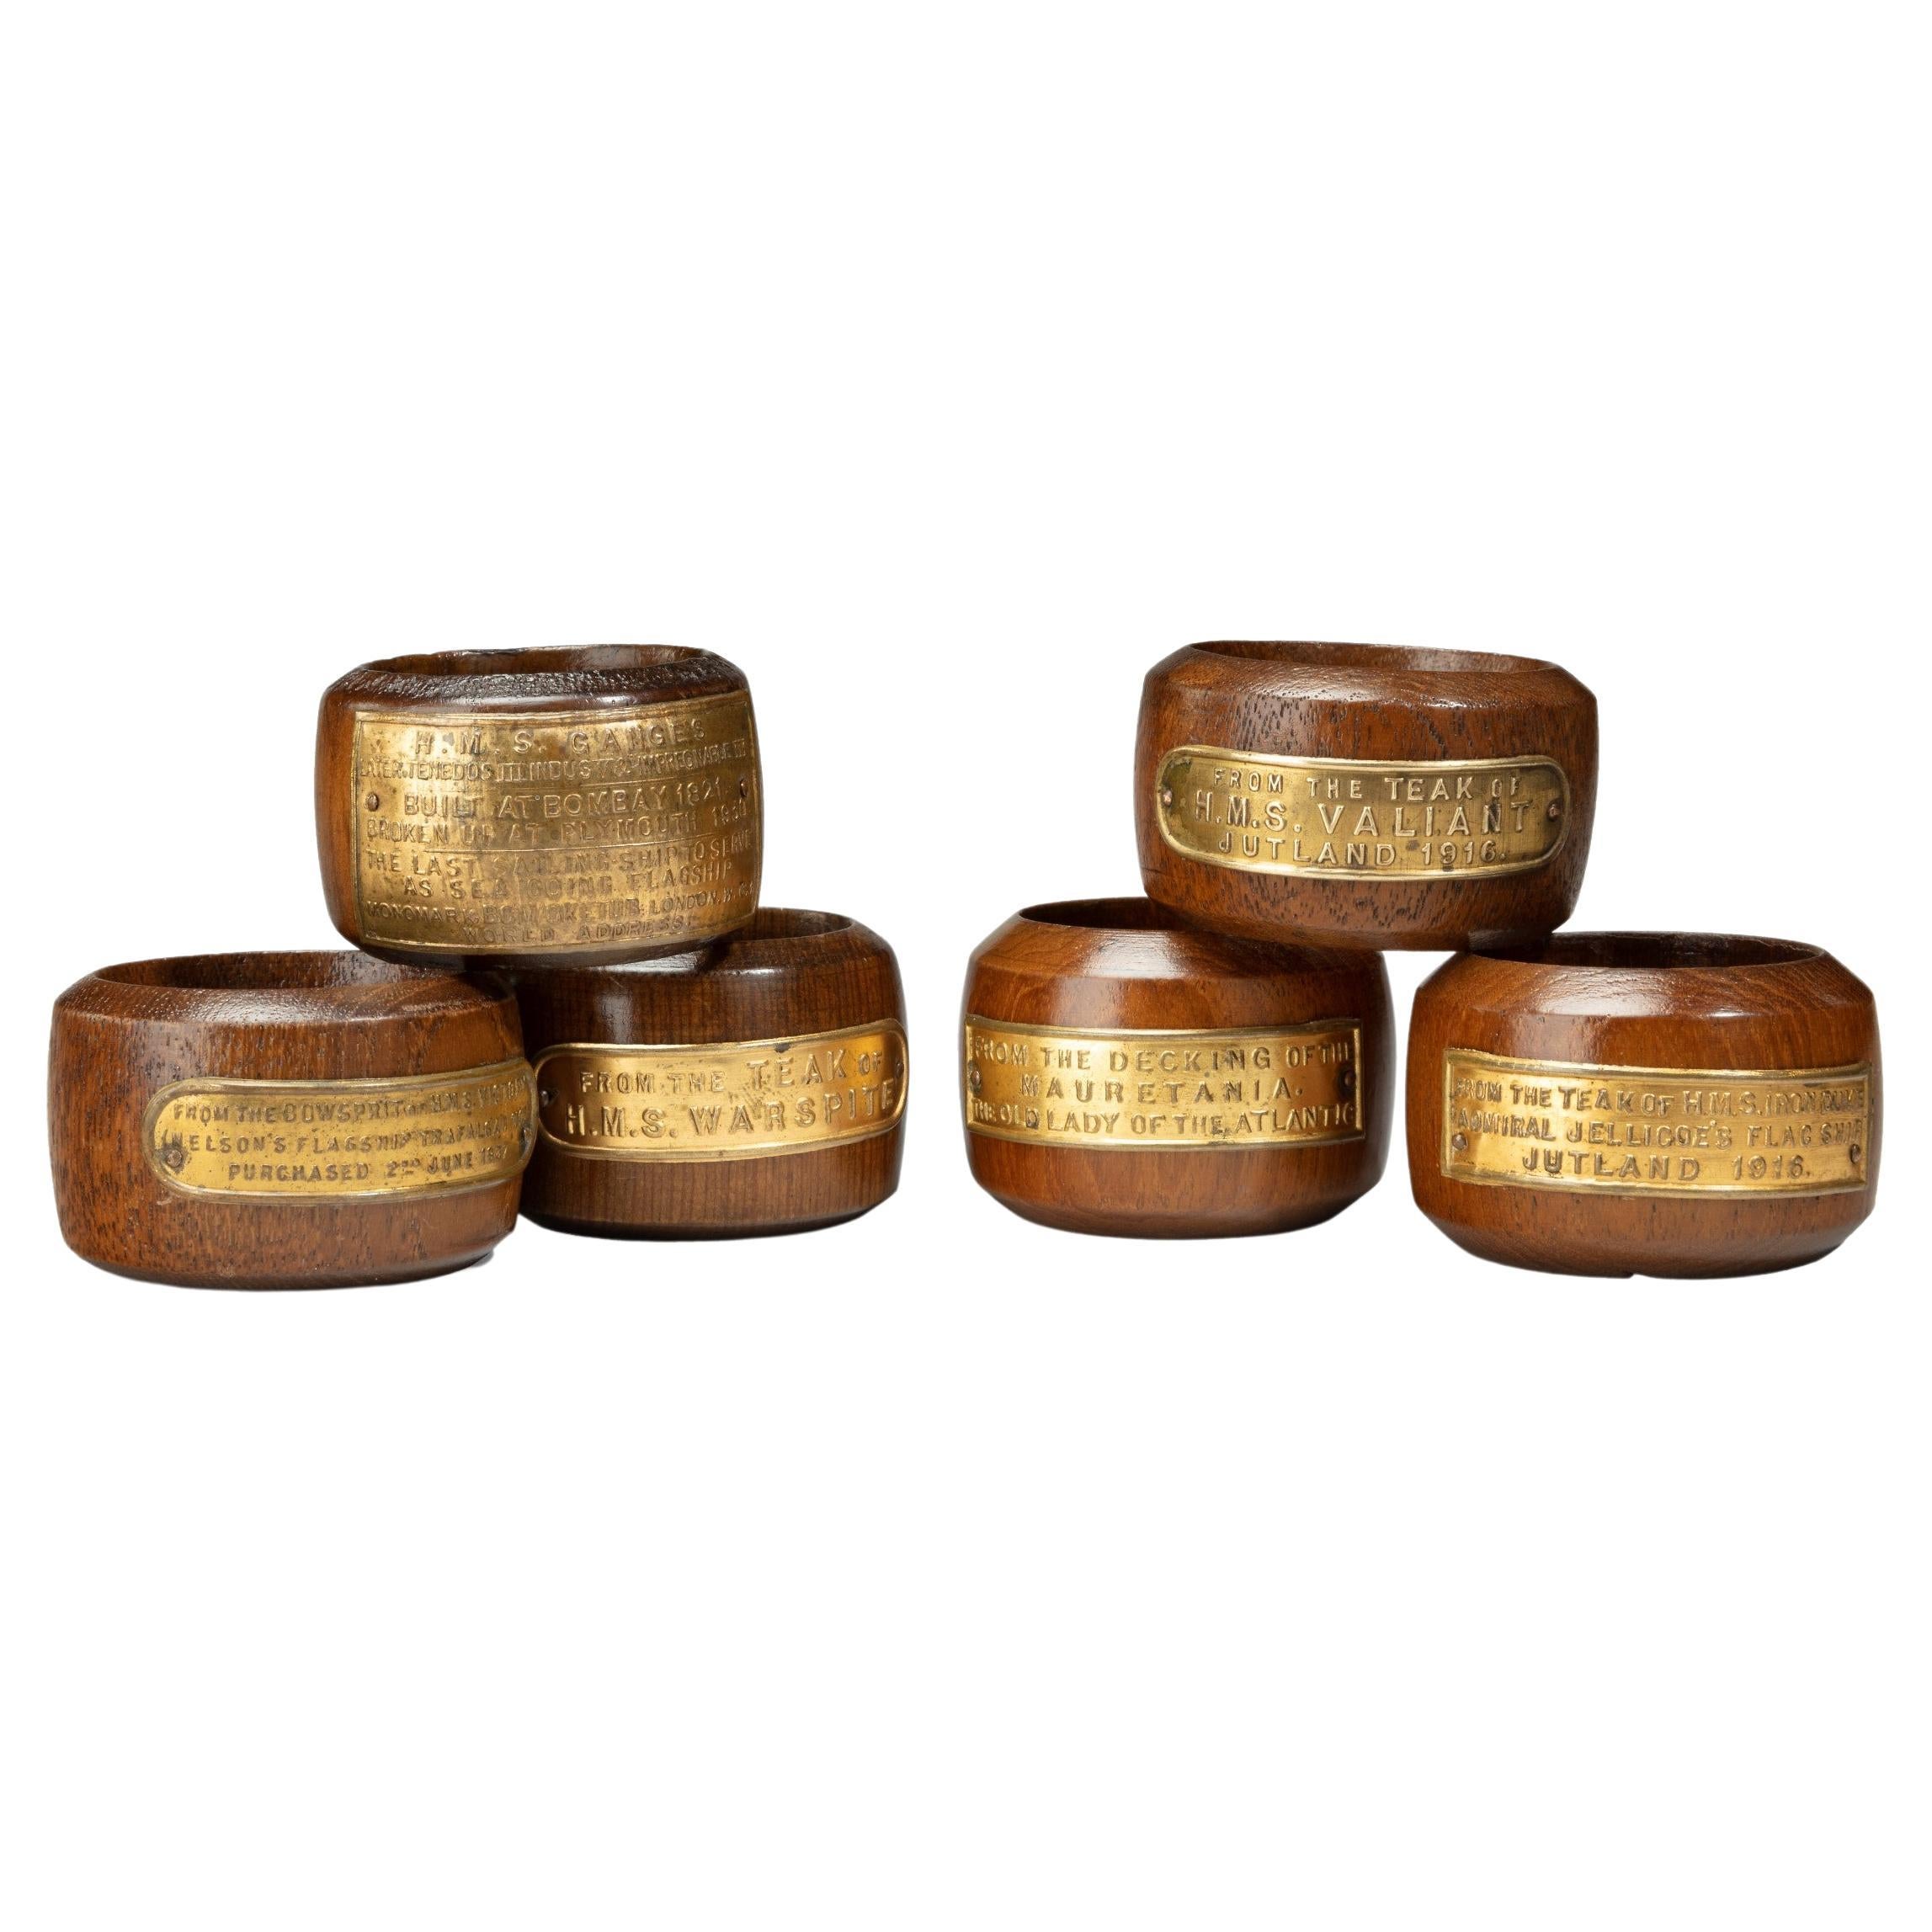 Collection of Napkin Rings Made from Ships’ Timbers